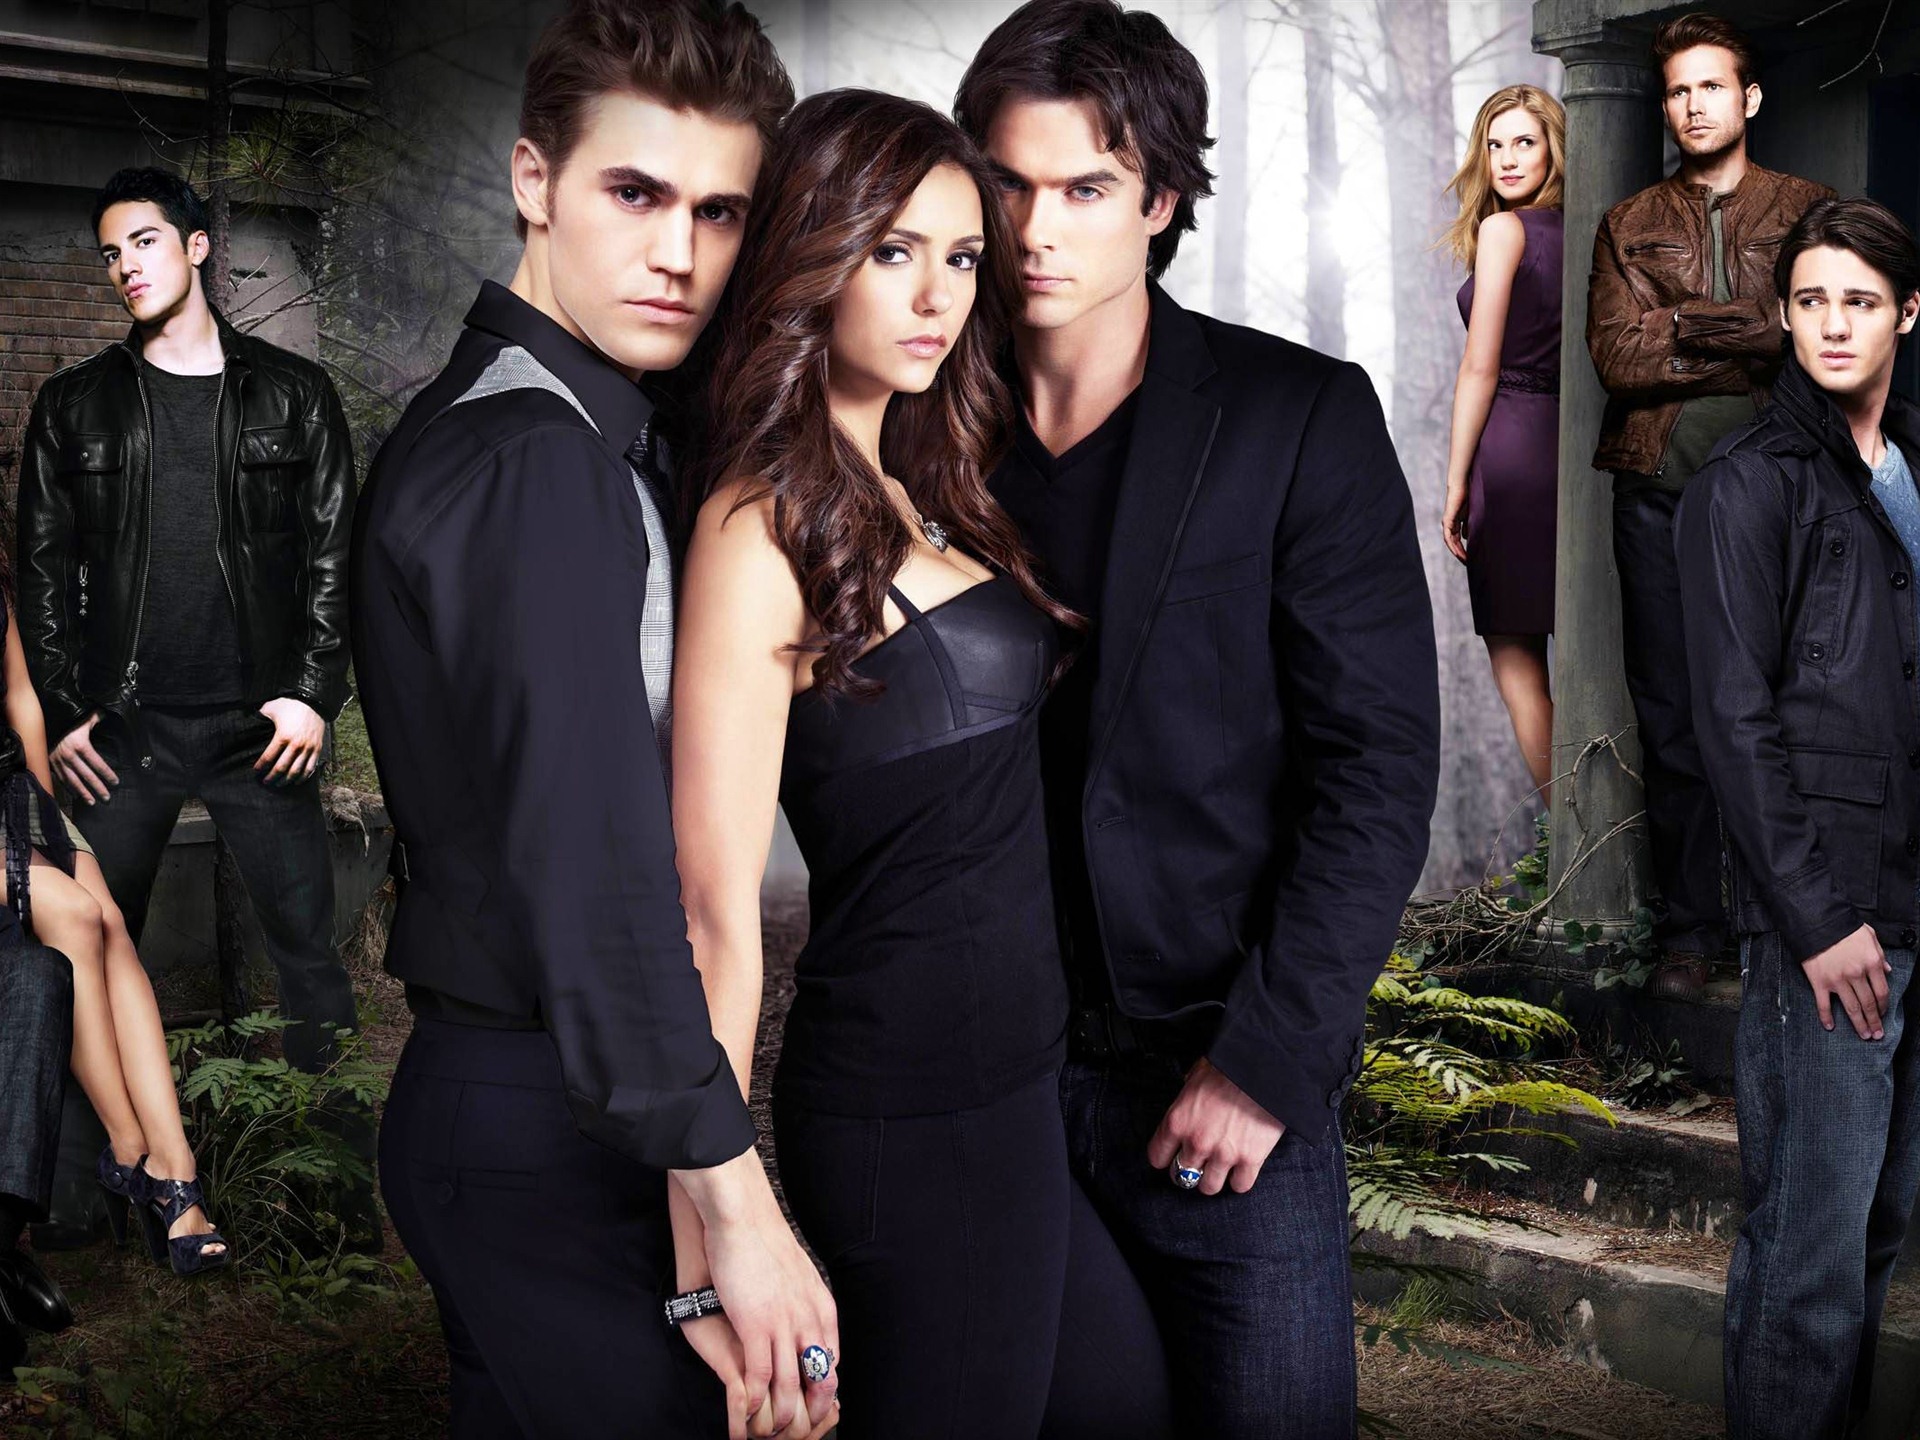 The Vampire Diaries wallpapers HD #12 - 1920x1440